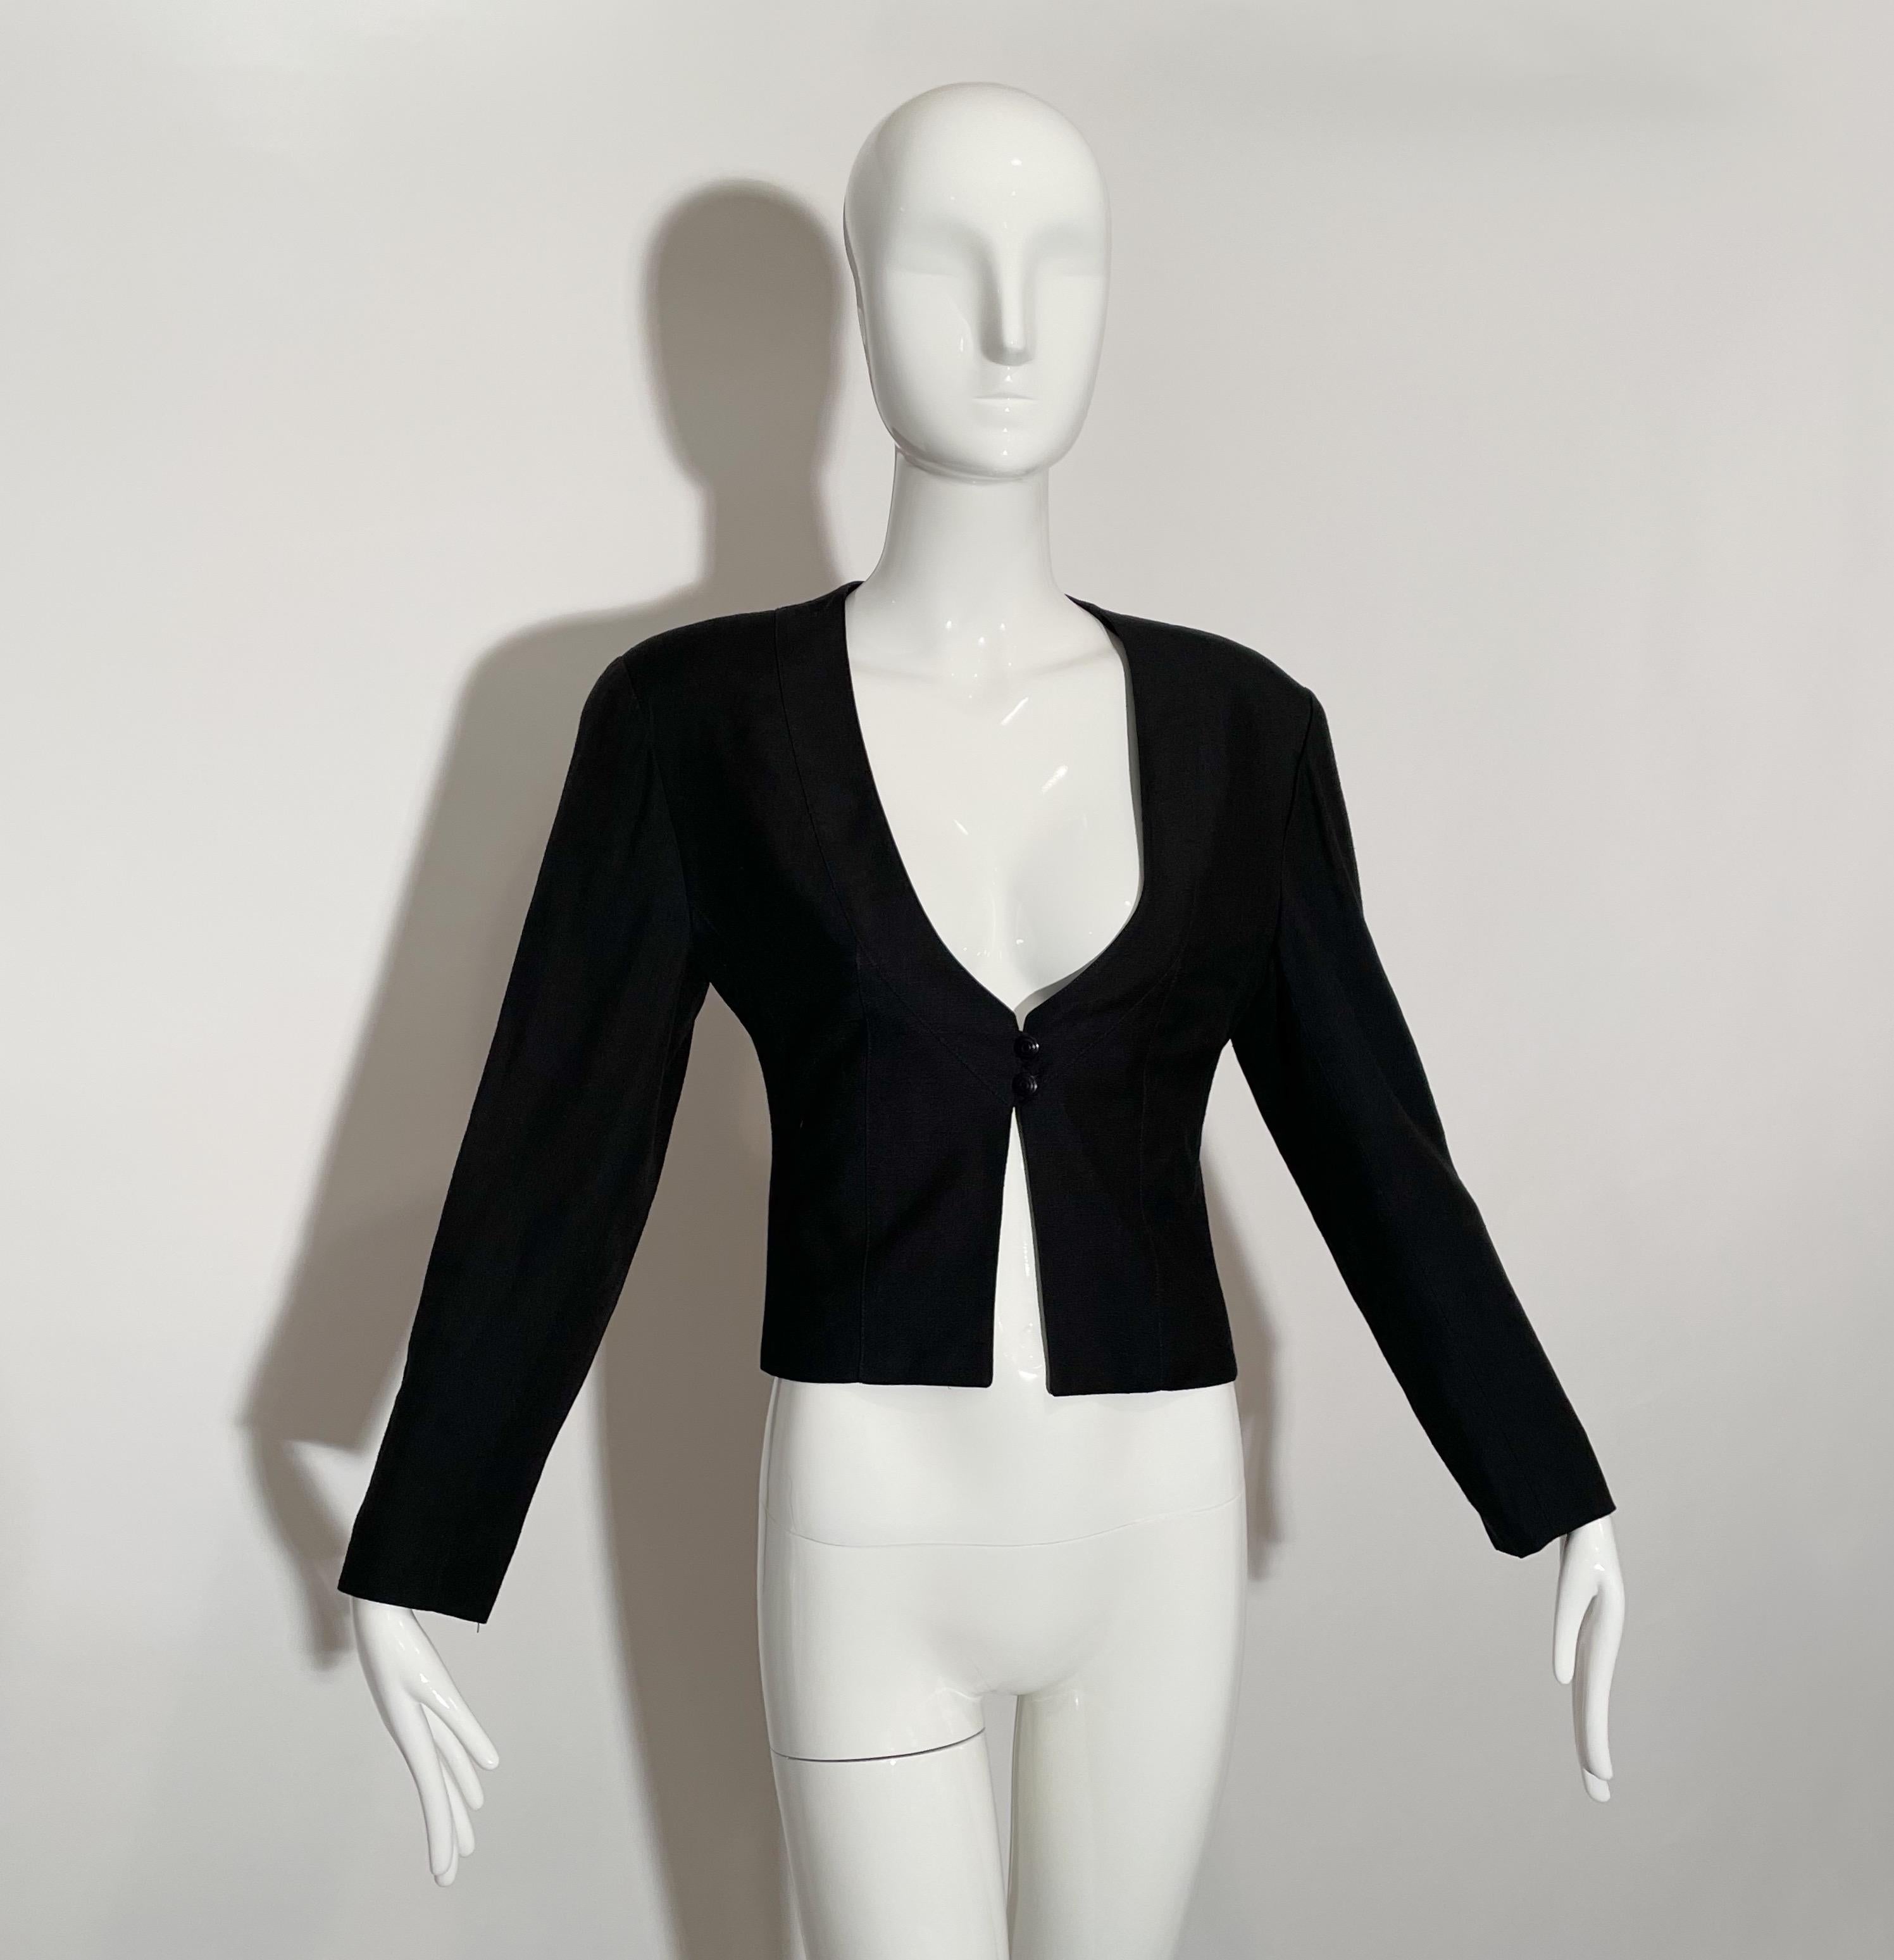 Black cropped blazer. Plunging neck line. Front button blosure. Lined. Viscose and linen. Made in France.

*Condition:  excellent vintage condition. No visible flaws.

Measurements Taken Laying Flat (inches)—

Shoulder to Shoulder: 16.5